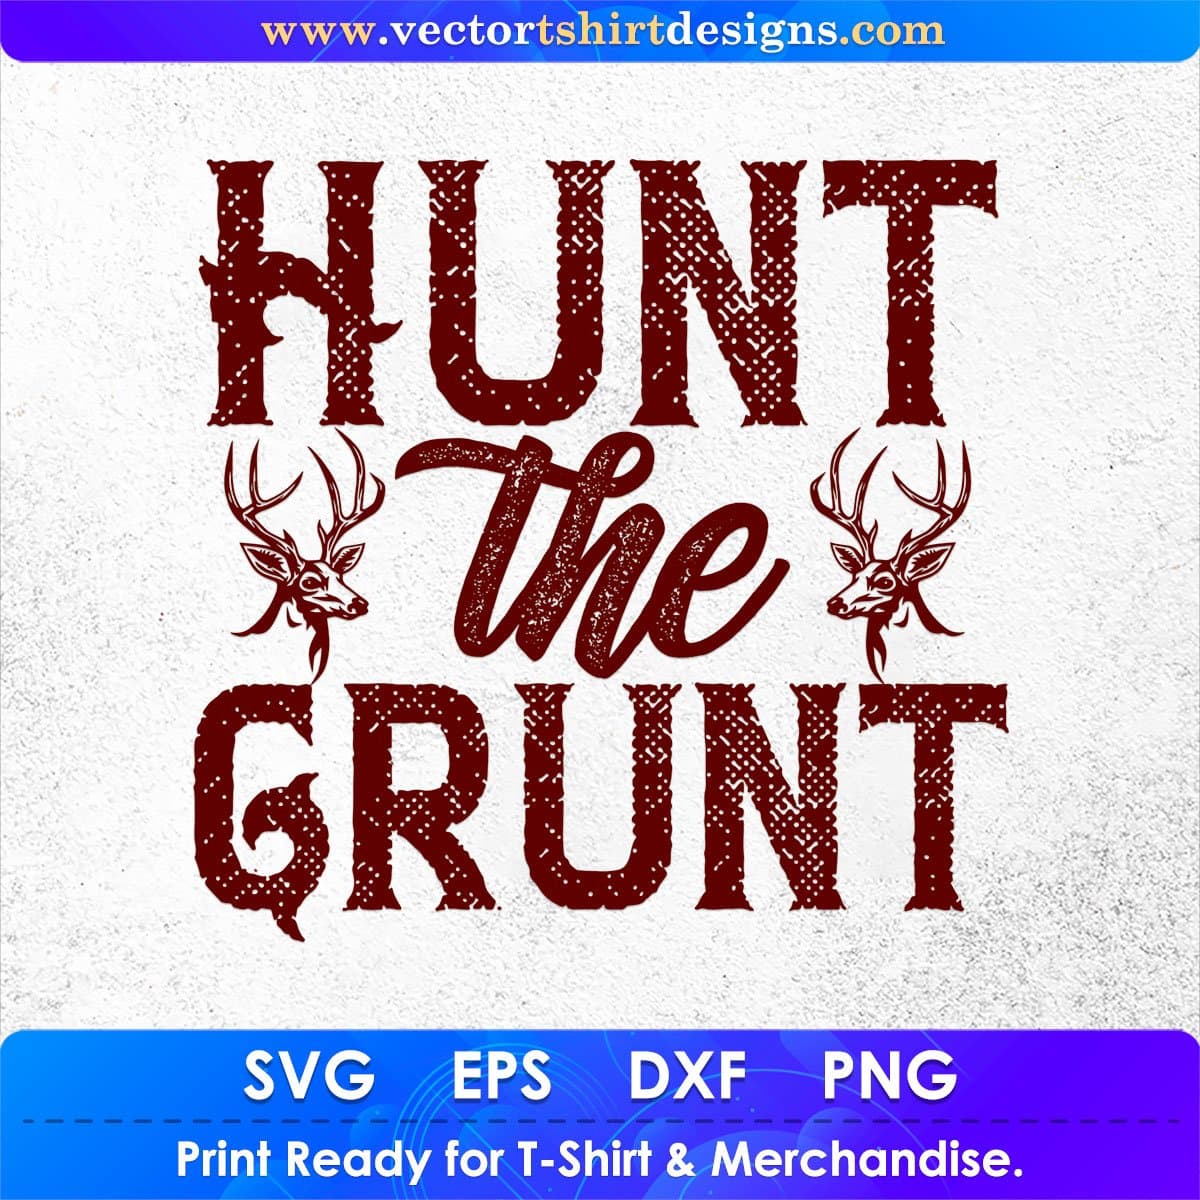 Hunt The Grunt Hunting Vector T shirt Design In Svg Png Cutting Printable Files